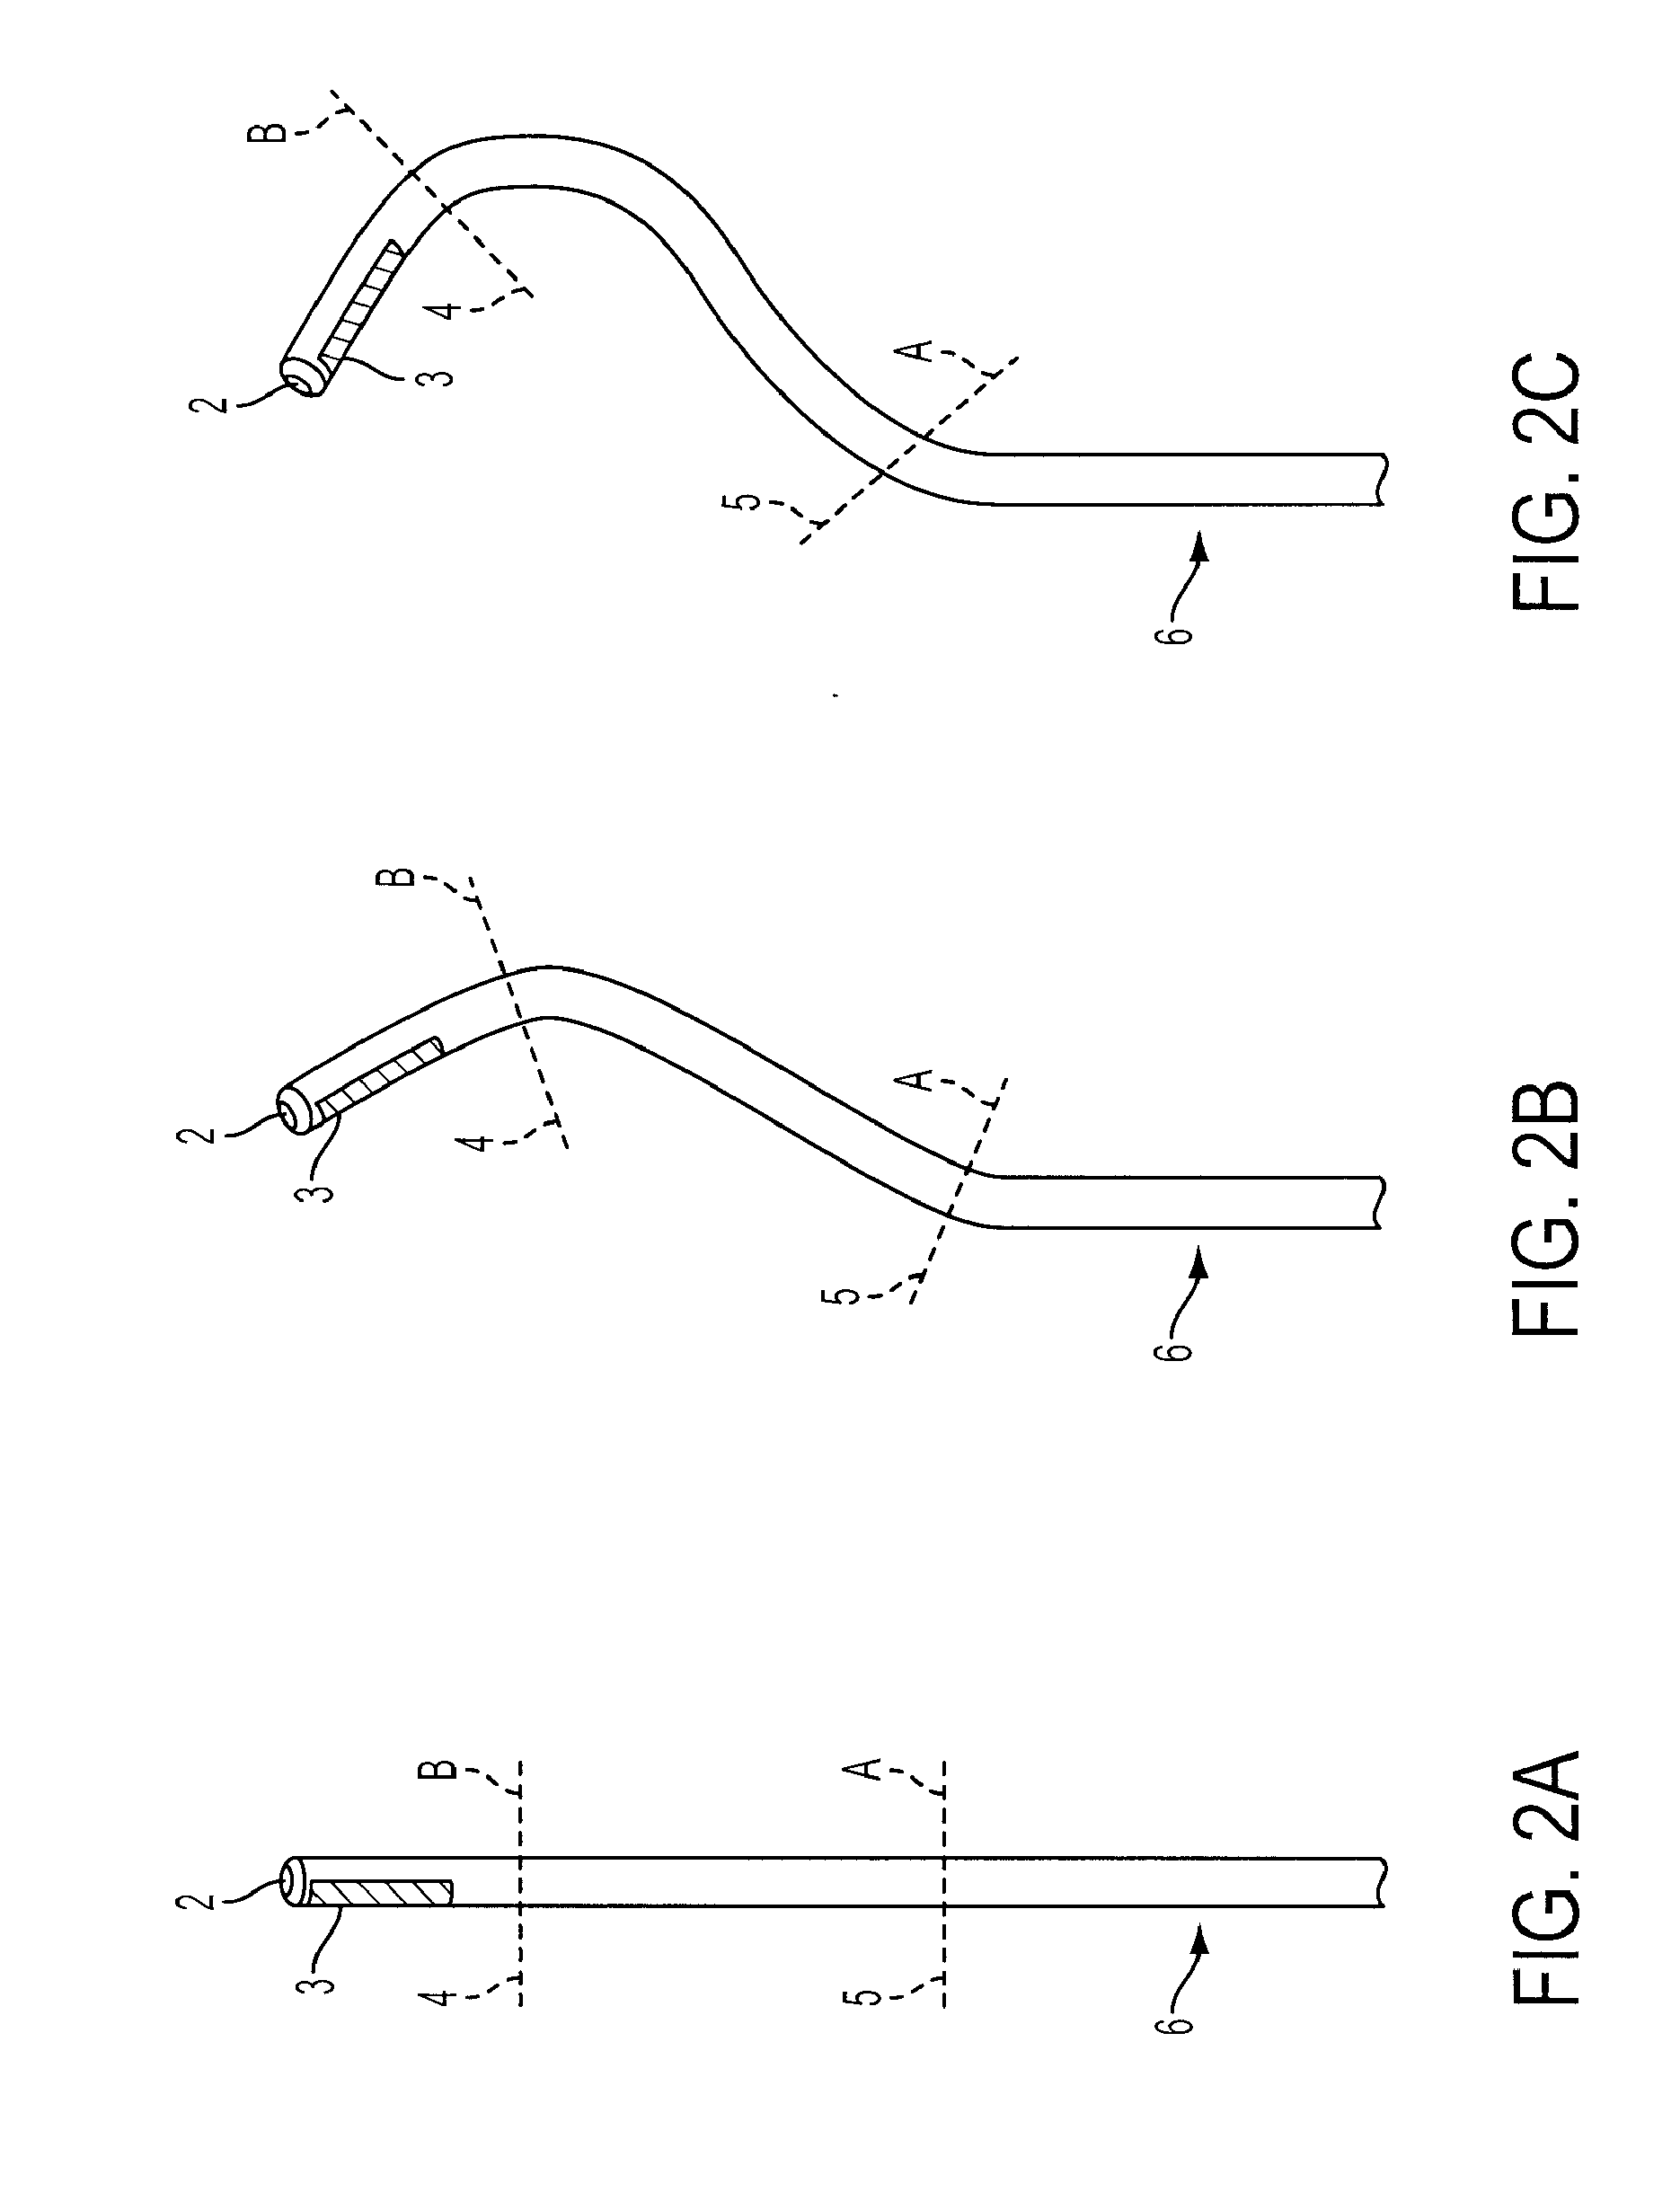 Electrode Catheter for Ablation Purposes and Related Method Thereof